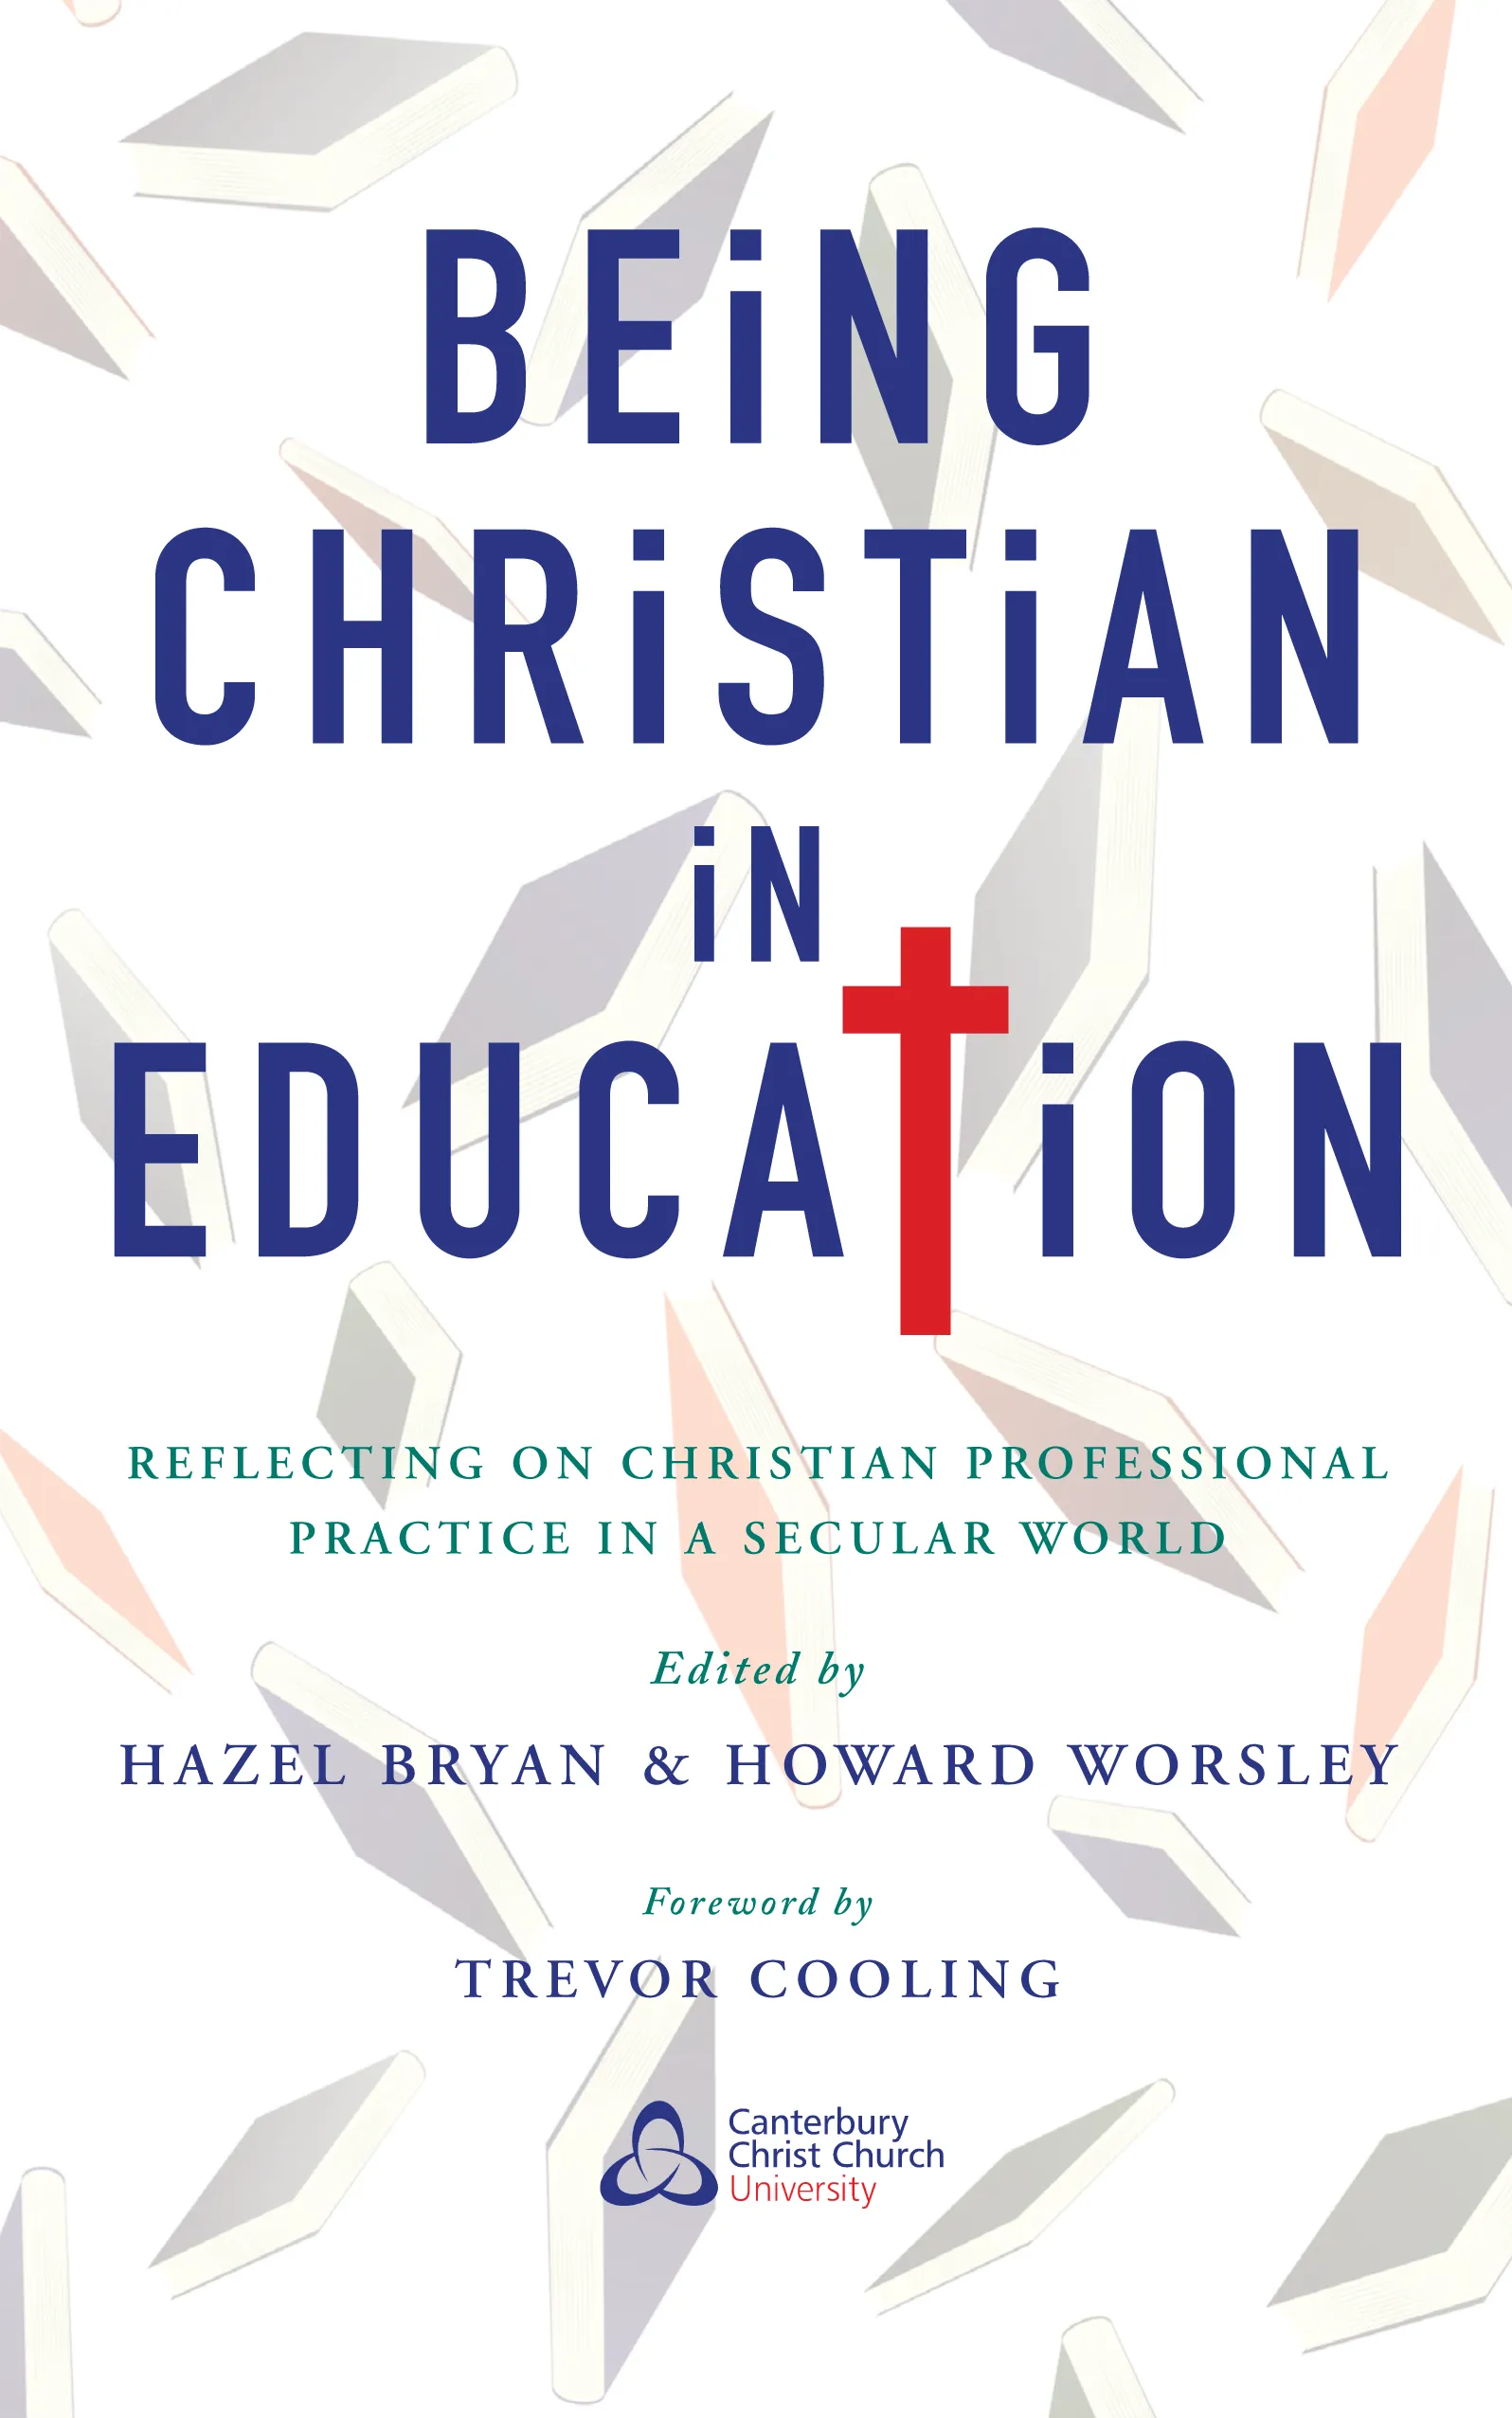 definition of christian education by different authors